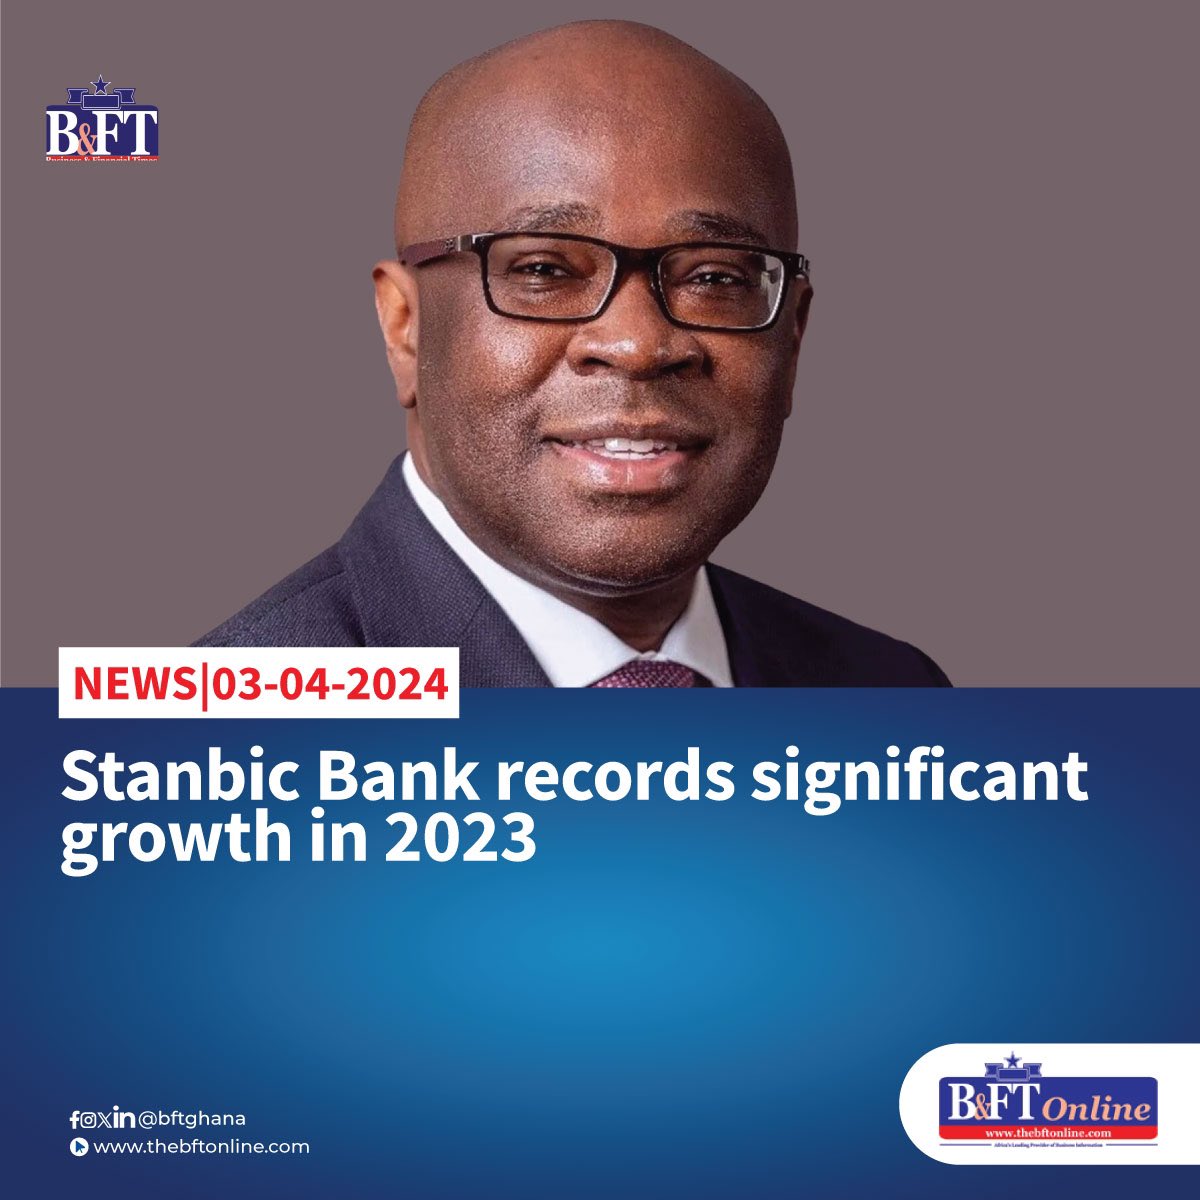 .@StanbicBankGH defied economic headwinds to achieve record-breaking financial results in 2023. Read more: thebftonline.com/2024/04/03/sta… #BftOnline #Ghana